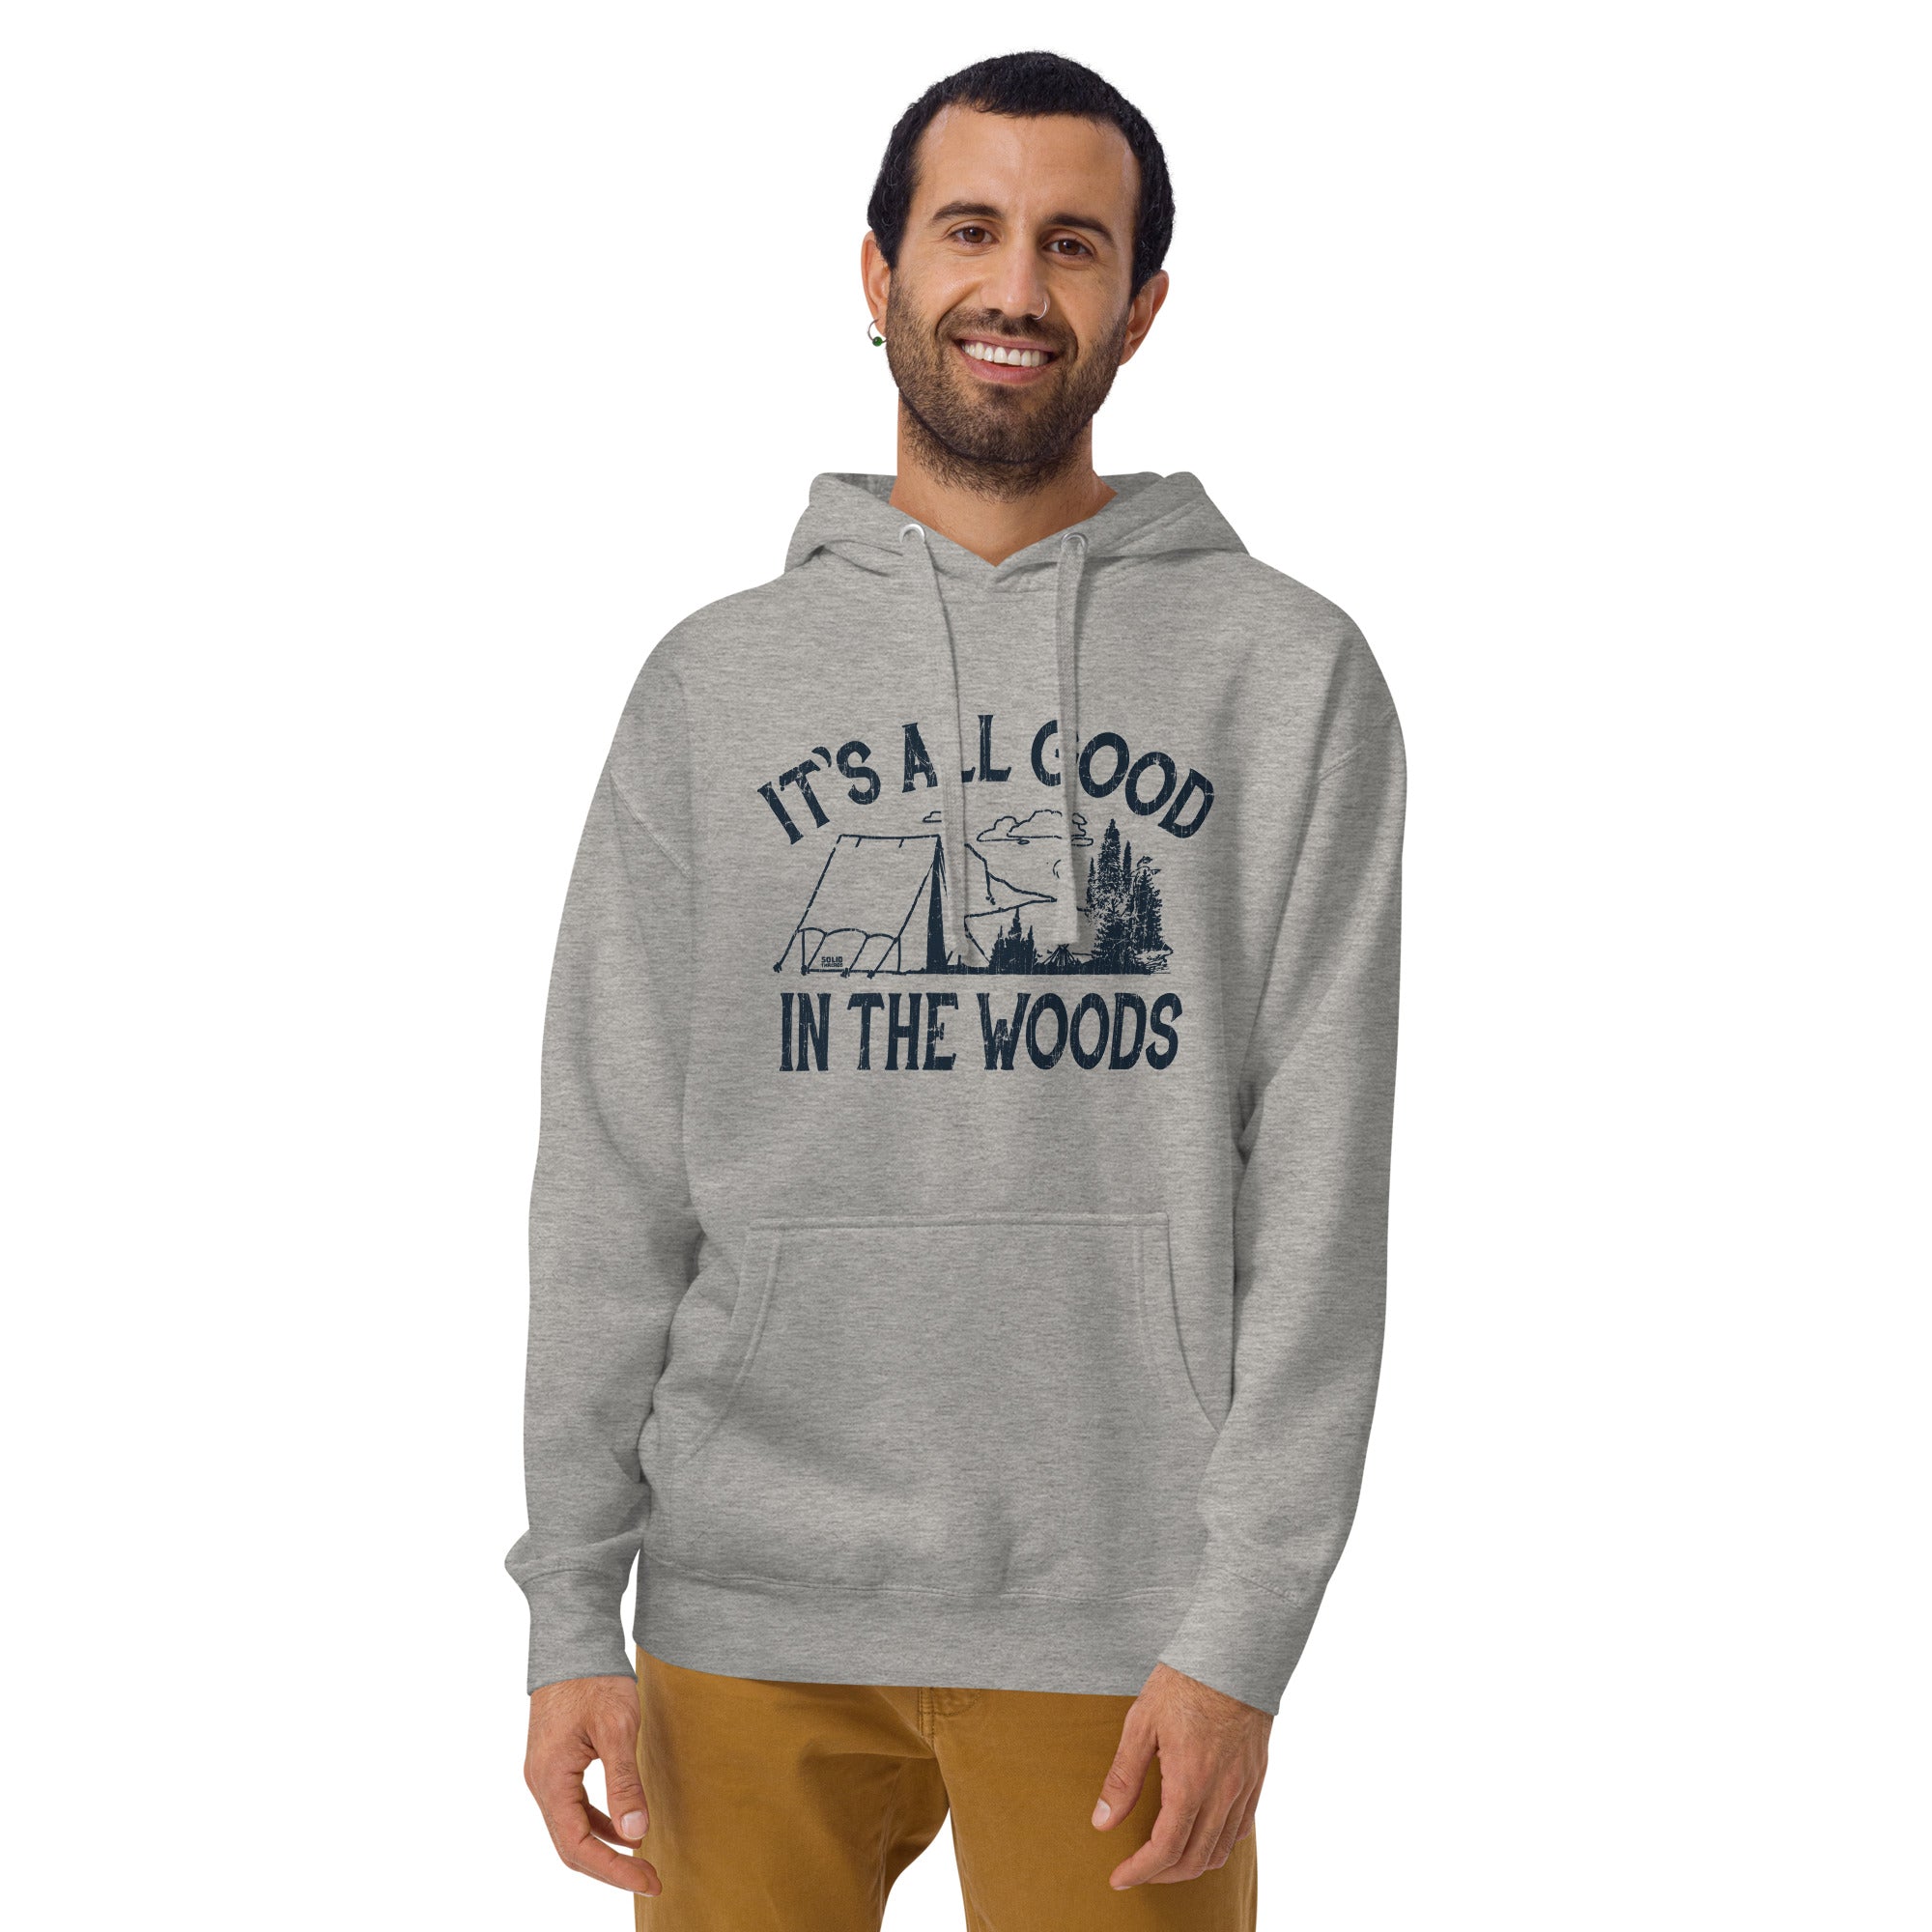 It's All Good In The Woods Vintage Classic Pullover Hoodie | Cool Camping Fleece On Model | Solid Threads